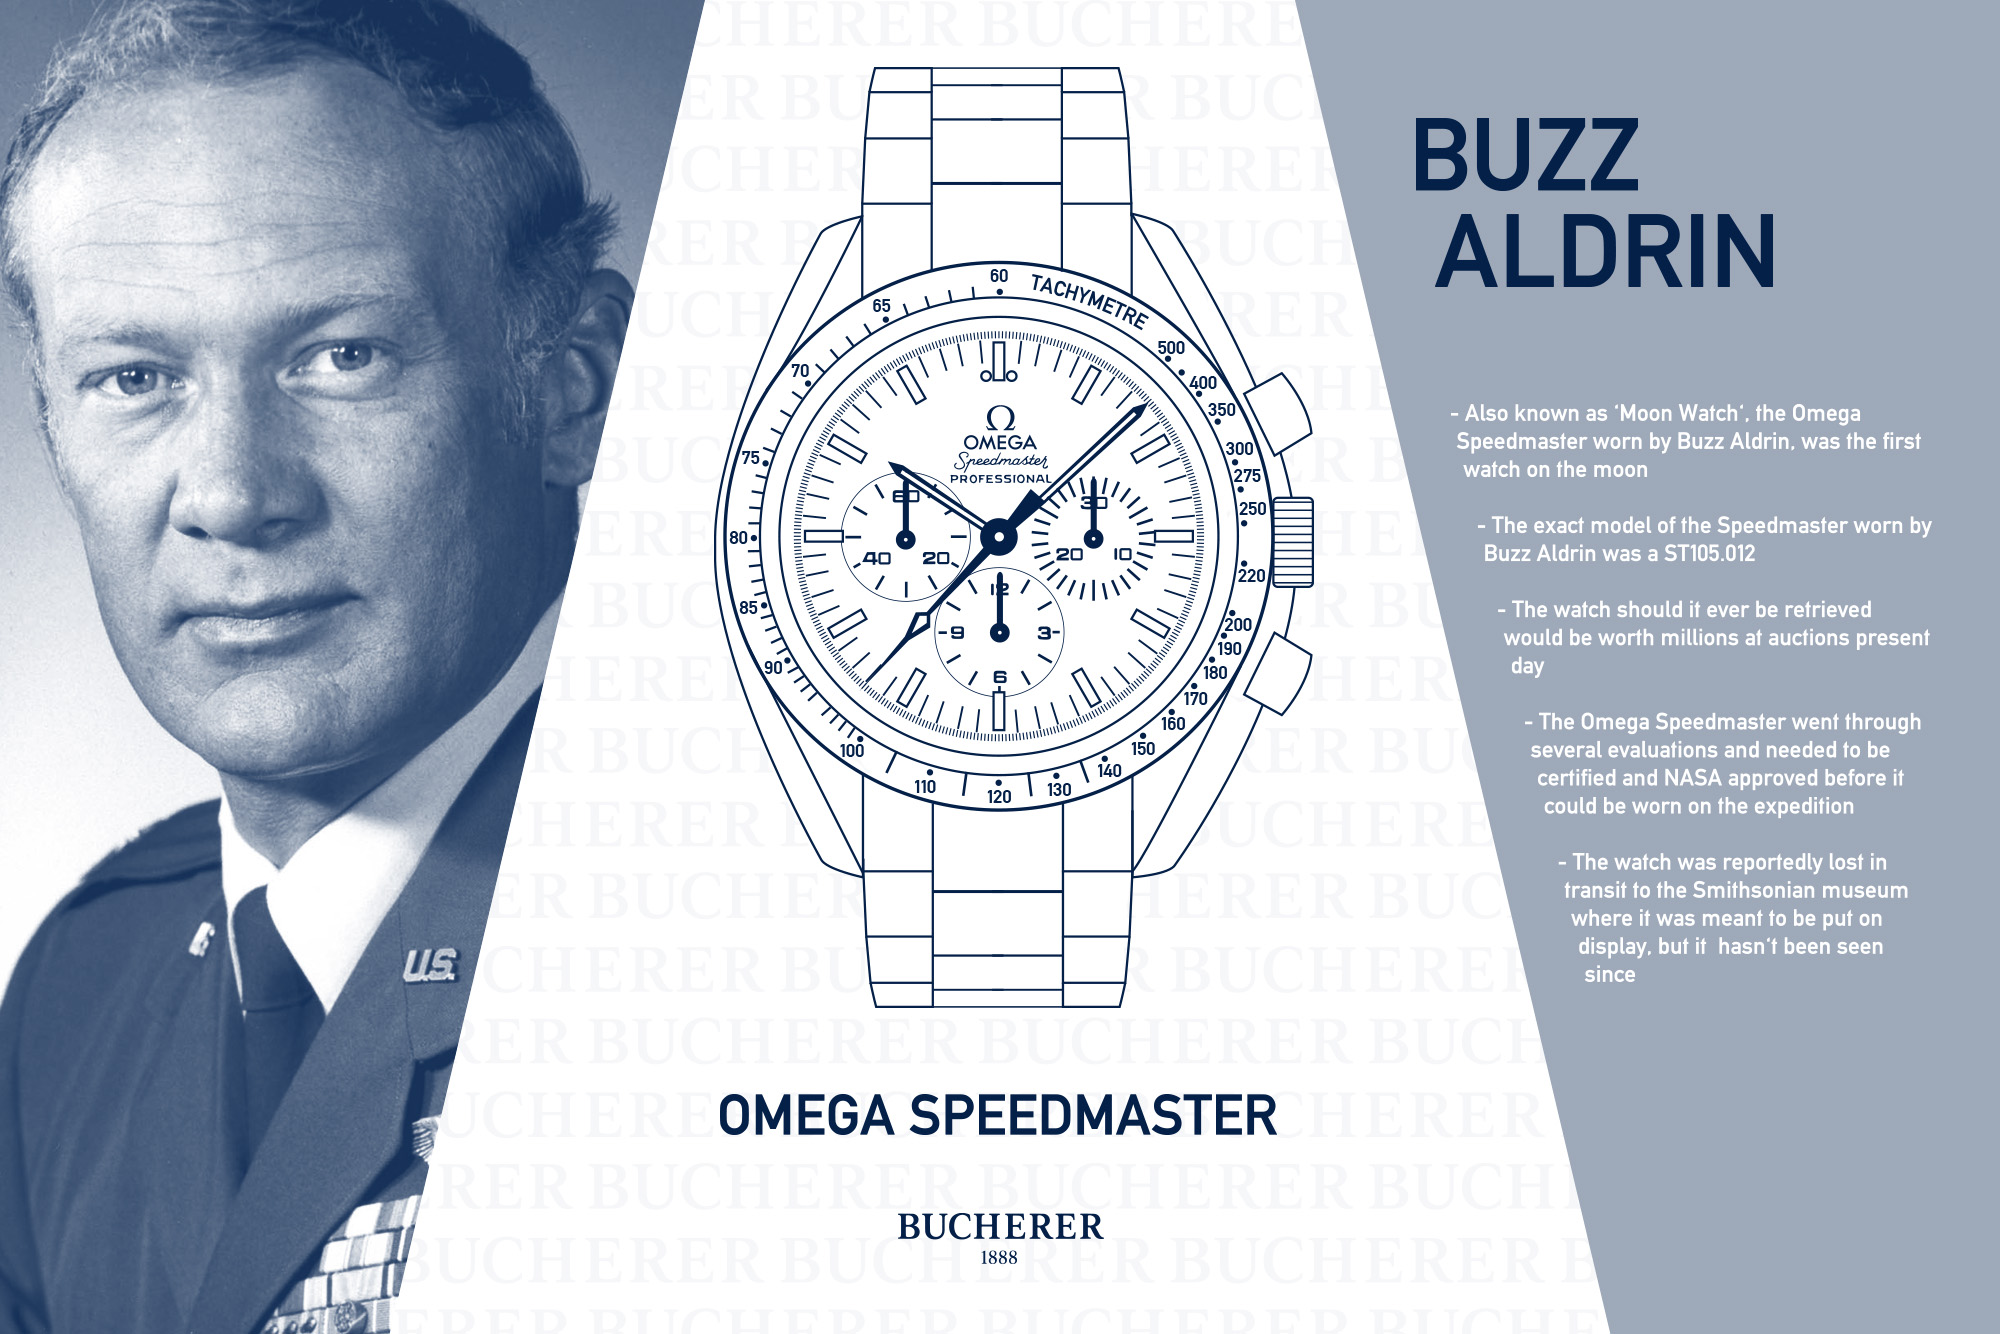 astronaut-and-fighter-pilot-buzz-aldrin-with-the-omega-speedmaster-watch